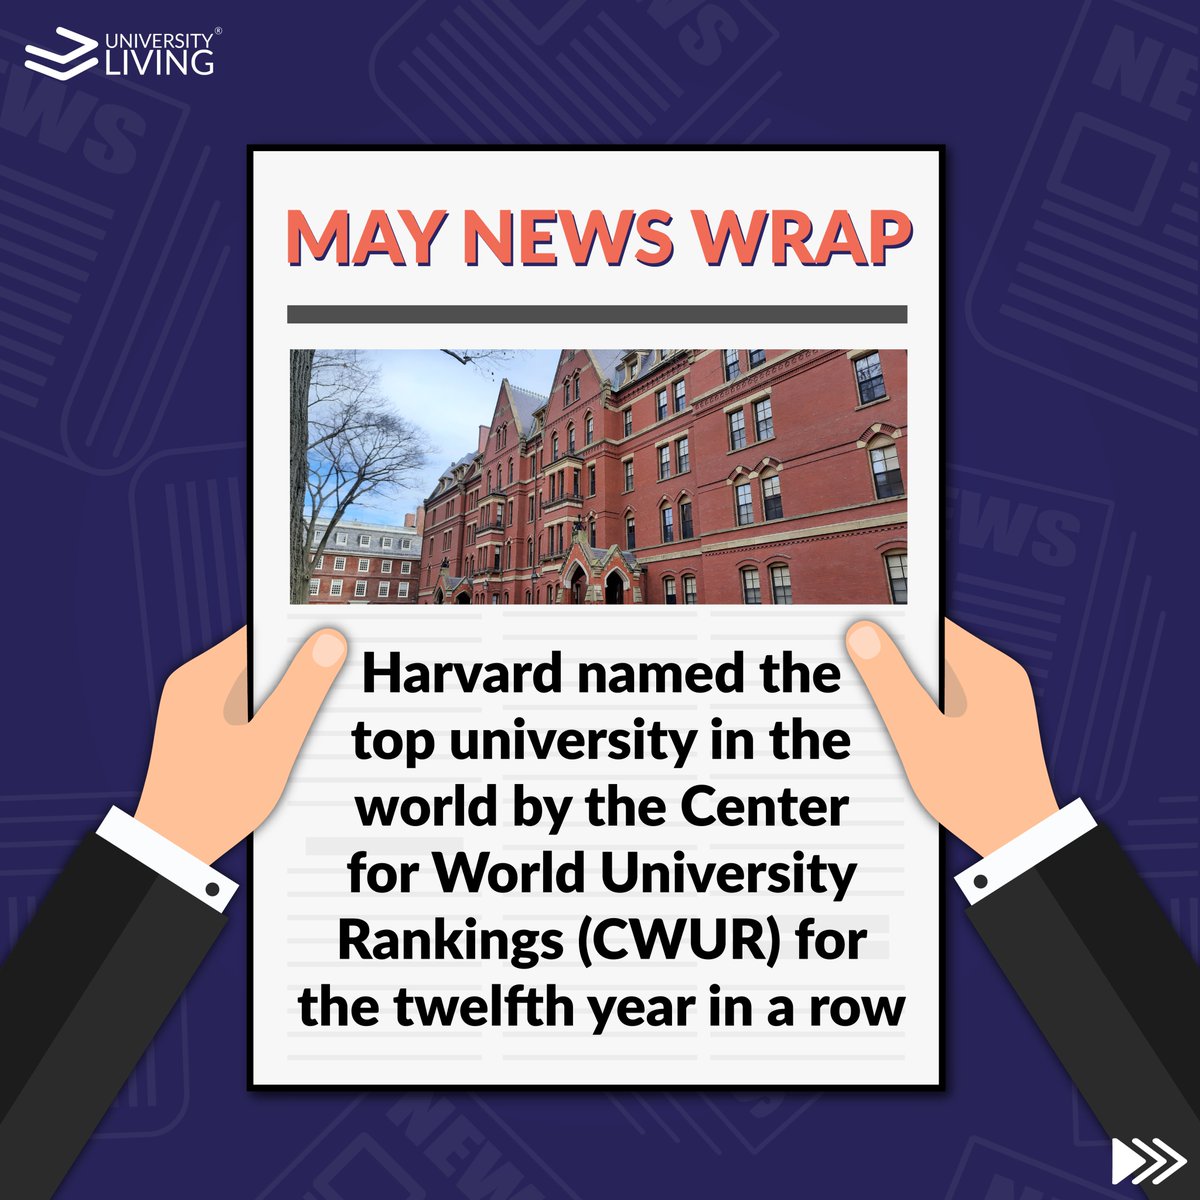 Everything that went down this month! Here it goes....

#newswrap #breakingnews #students #maynews #trendingnews #internationalstudents  #harvard #newzealand #uk #collegestudents #news #collegetwt #university